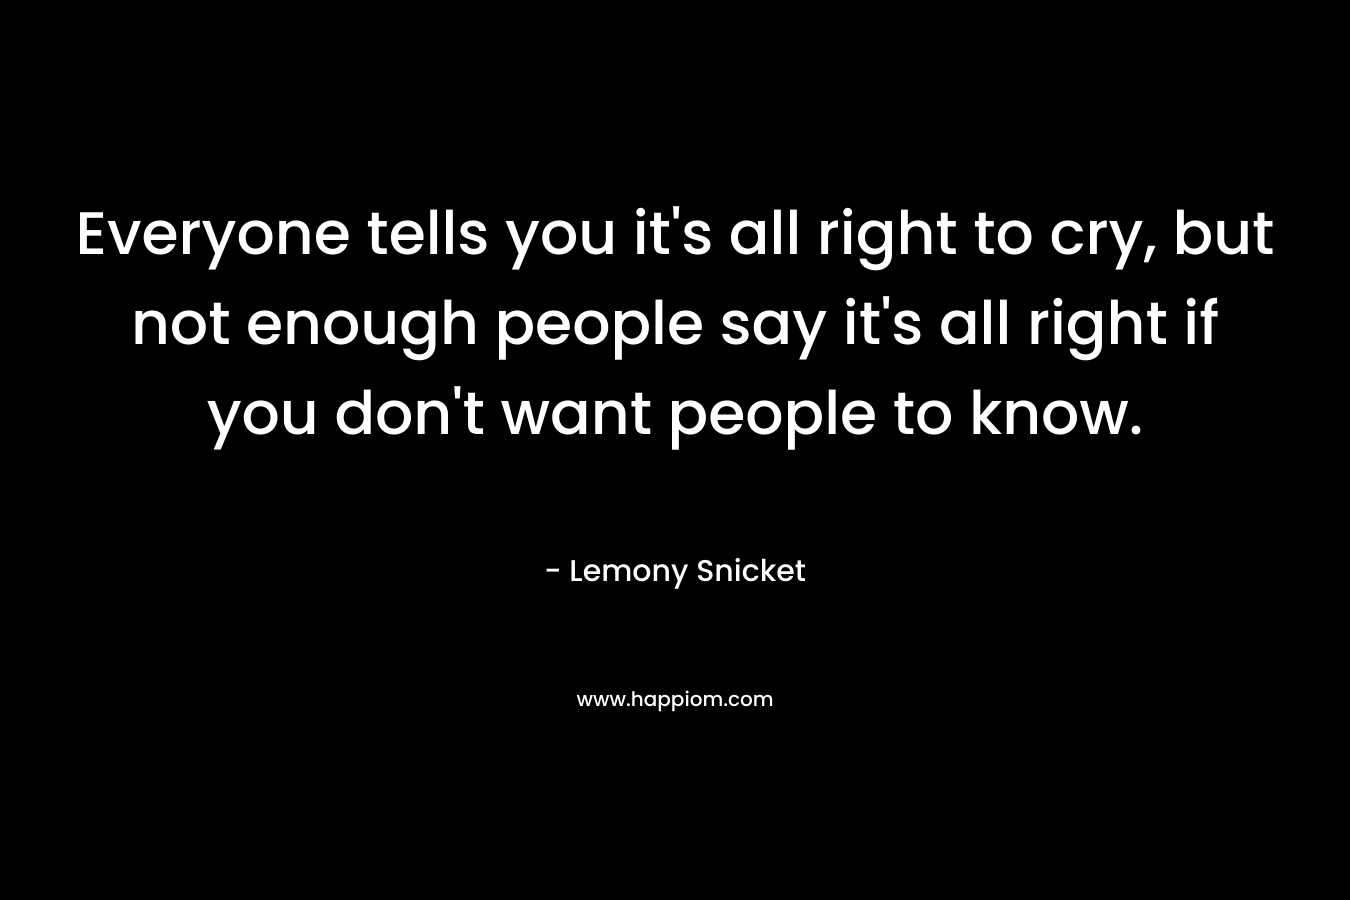 Everyone tells you it's all right to cry, but not enough people say it's all right if you don't want people to know.